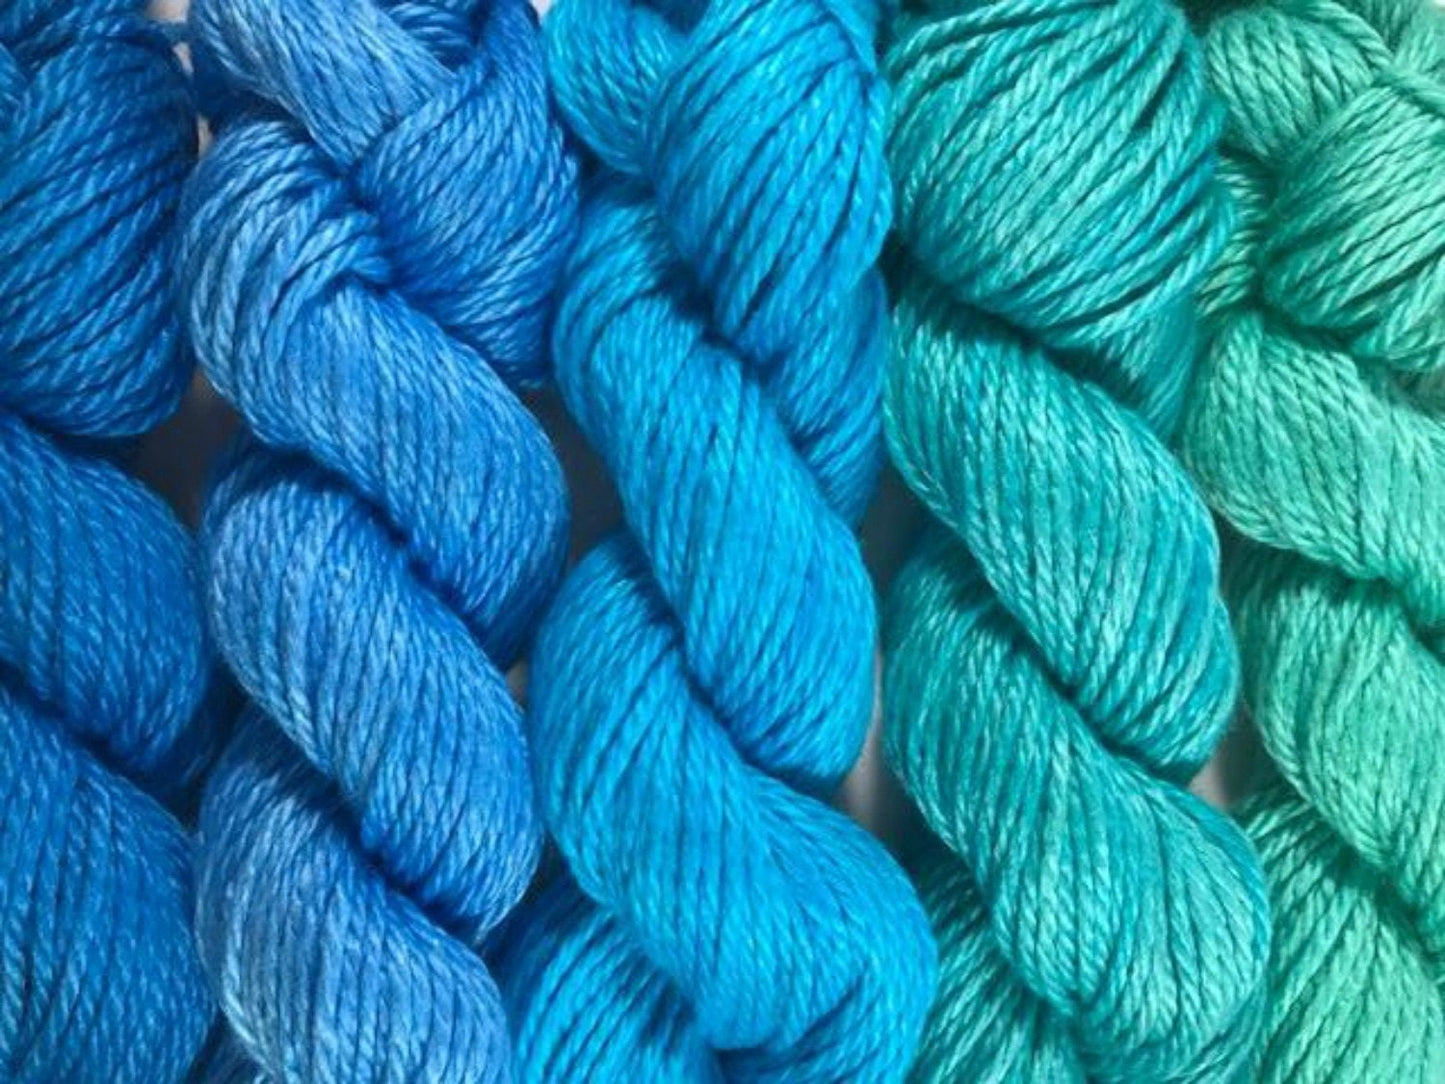 Bamboo Cotton Yarn - Hand Dyed - Teal Blue Gradient - DK Light Worsted - 3 Ply - Plant Based - Indie Dyed - Semi Solids - Vegan - Artisan